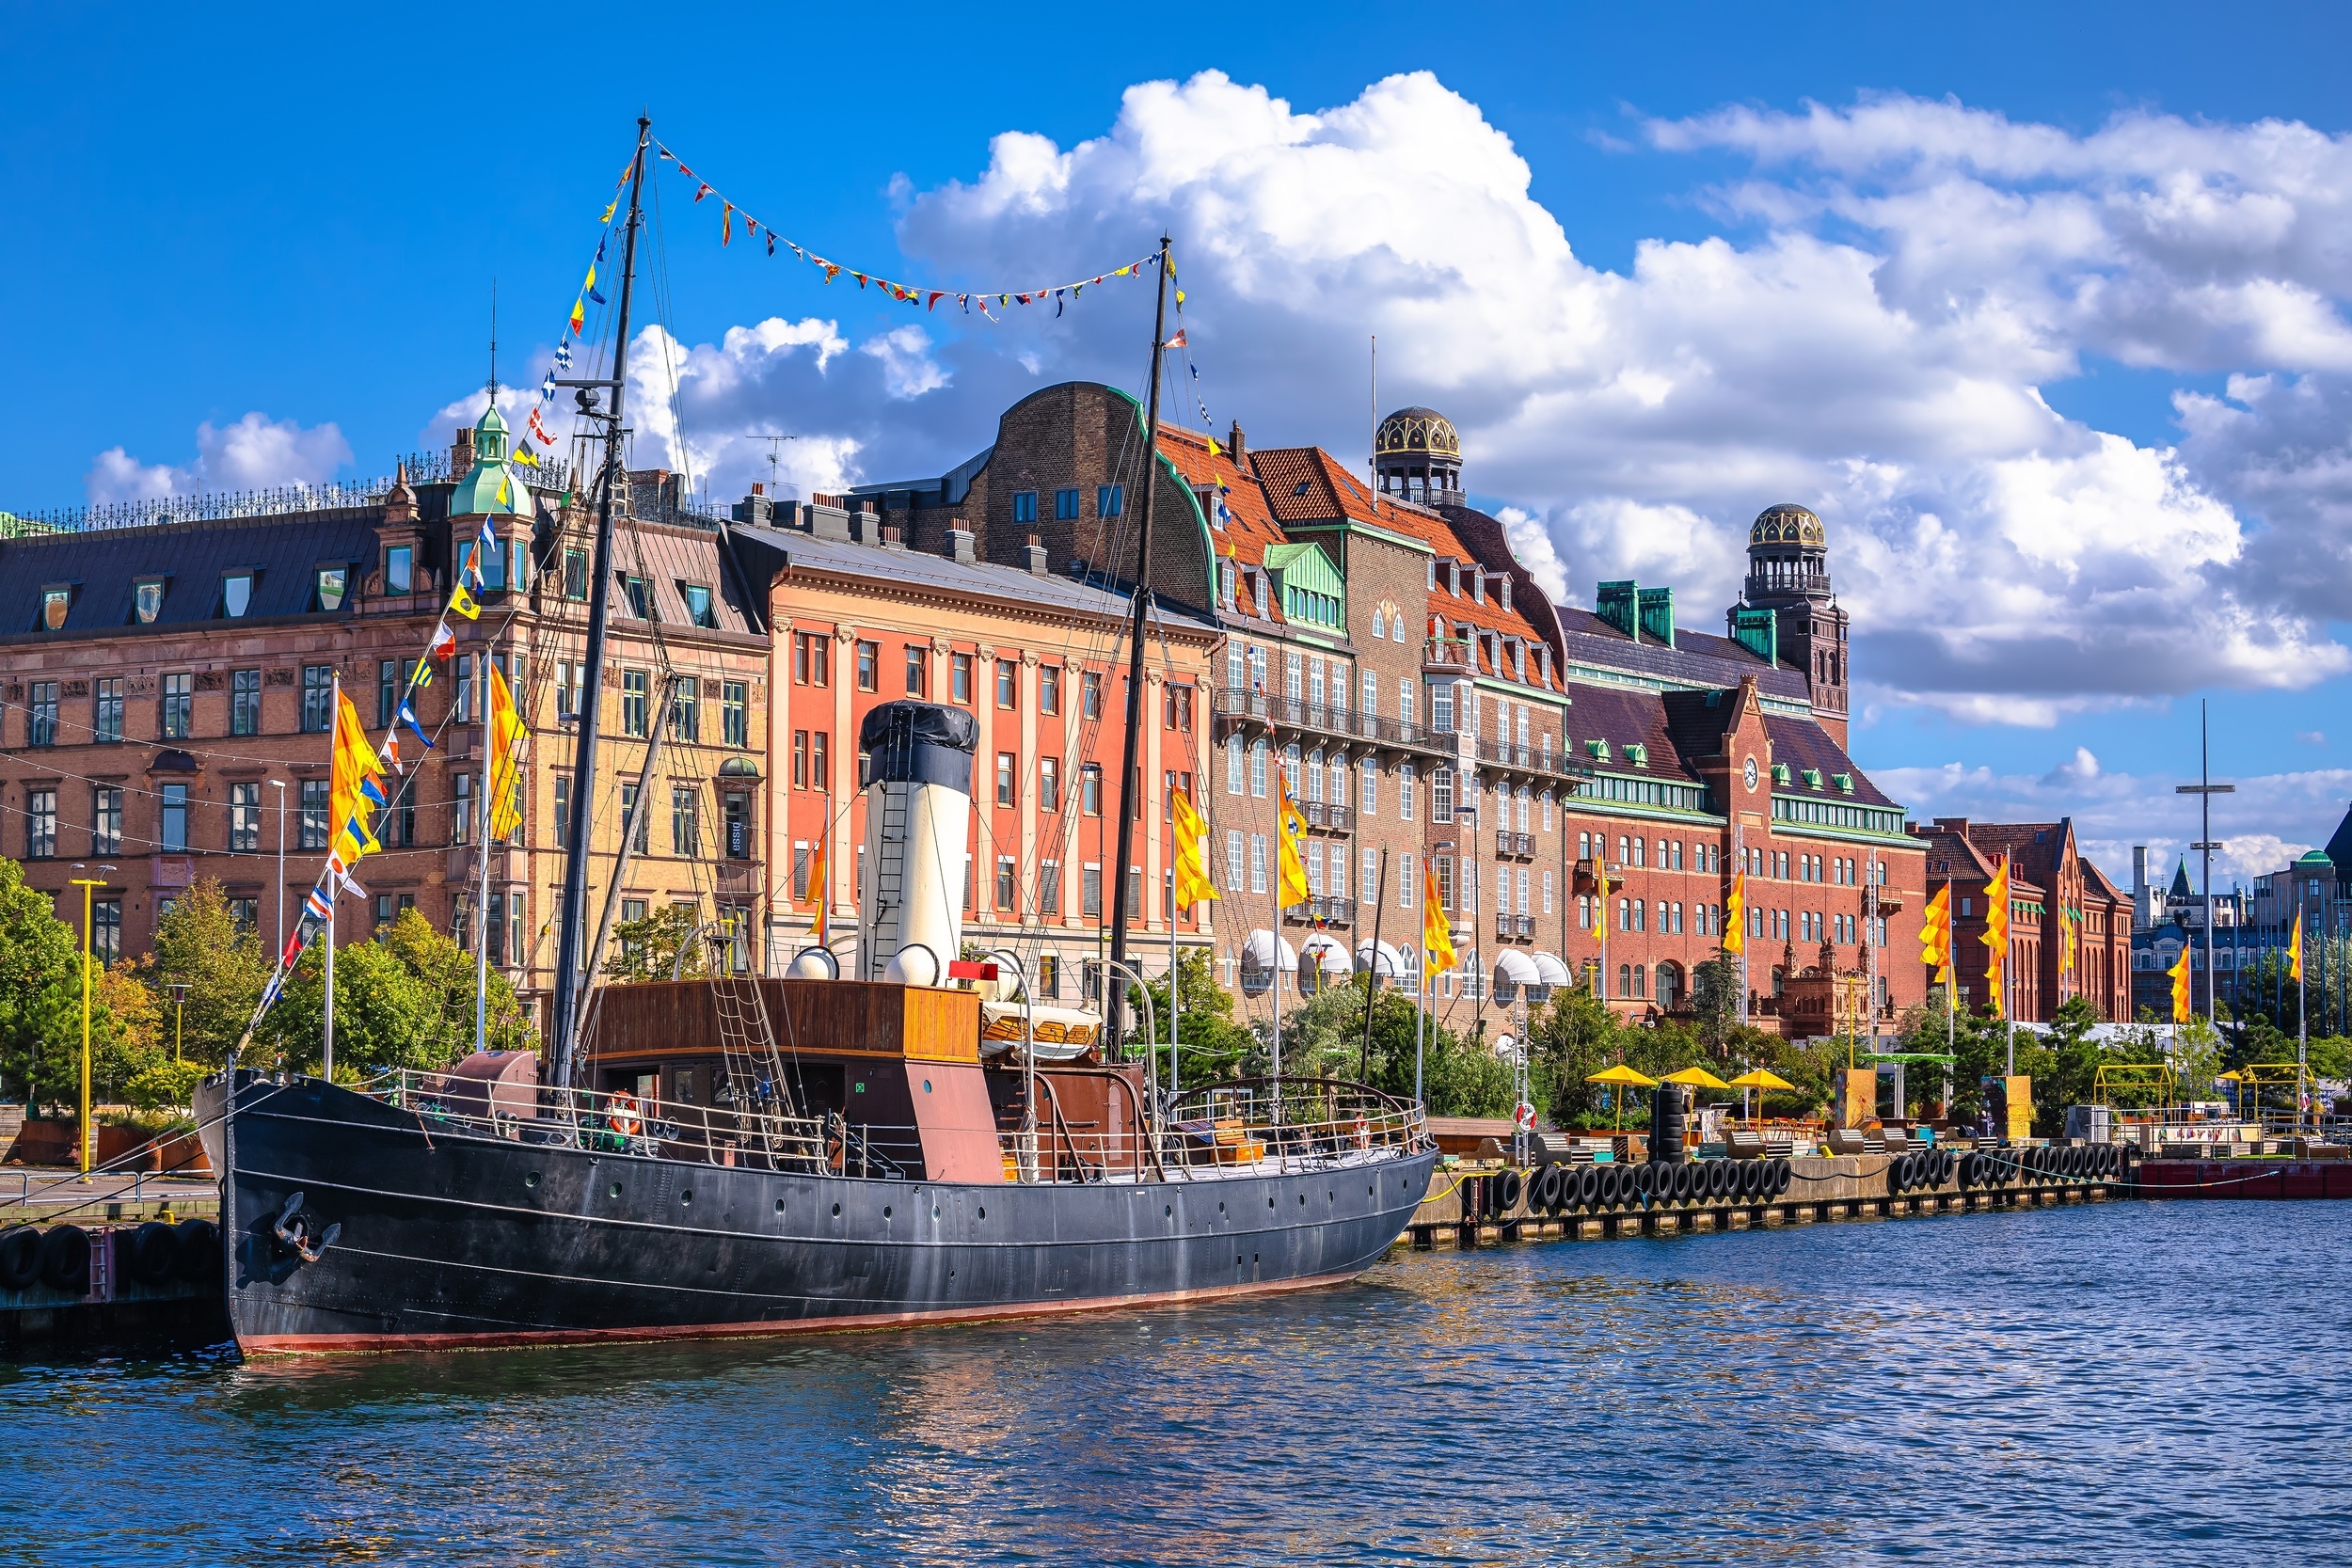 <p>Move over, Stockholm. Malmo is here to steal the show amongst visitors in spring. Enjoy the coastal location with a fika (Swedish coffee and cake break) along the water in the friendlier temps. Then, bike through the city and peruse the many markets throughout the week.</p><p><a href='https://www.msn.com/en-us/community/channel/vid-cj9pqbr0vn9in2b6ddcd8sfgpfq6x6utp44fssrv6mc2gtybw0us'>Did you enjoy this slideshow? Follow us on MSN to see more of our exclusive lifestyle content.</a></p>